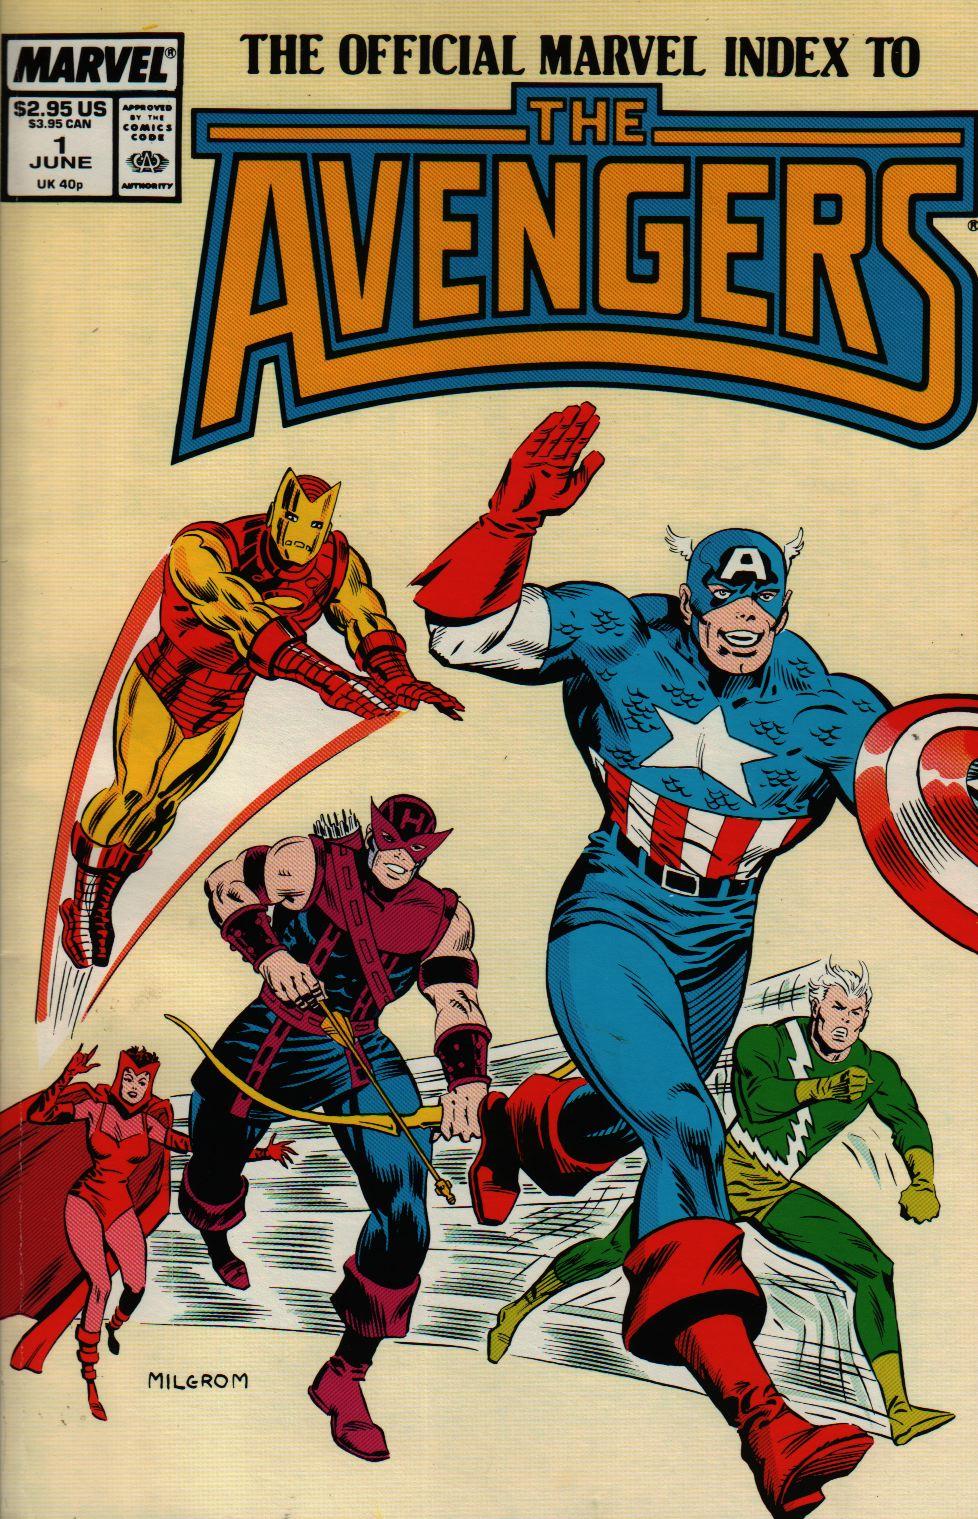 Official Marvel Index to Avengers Vol. 1 #1